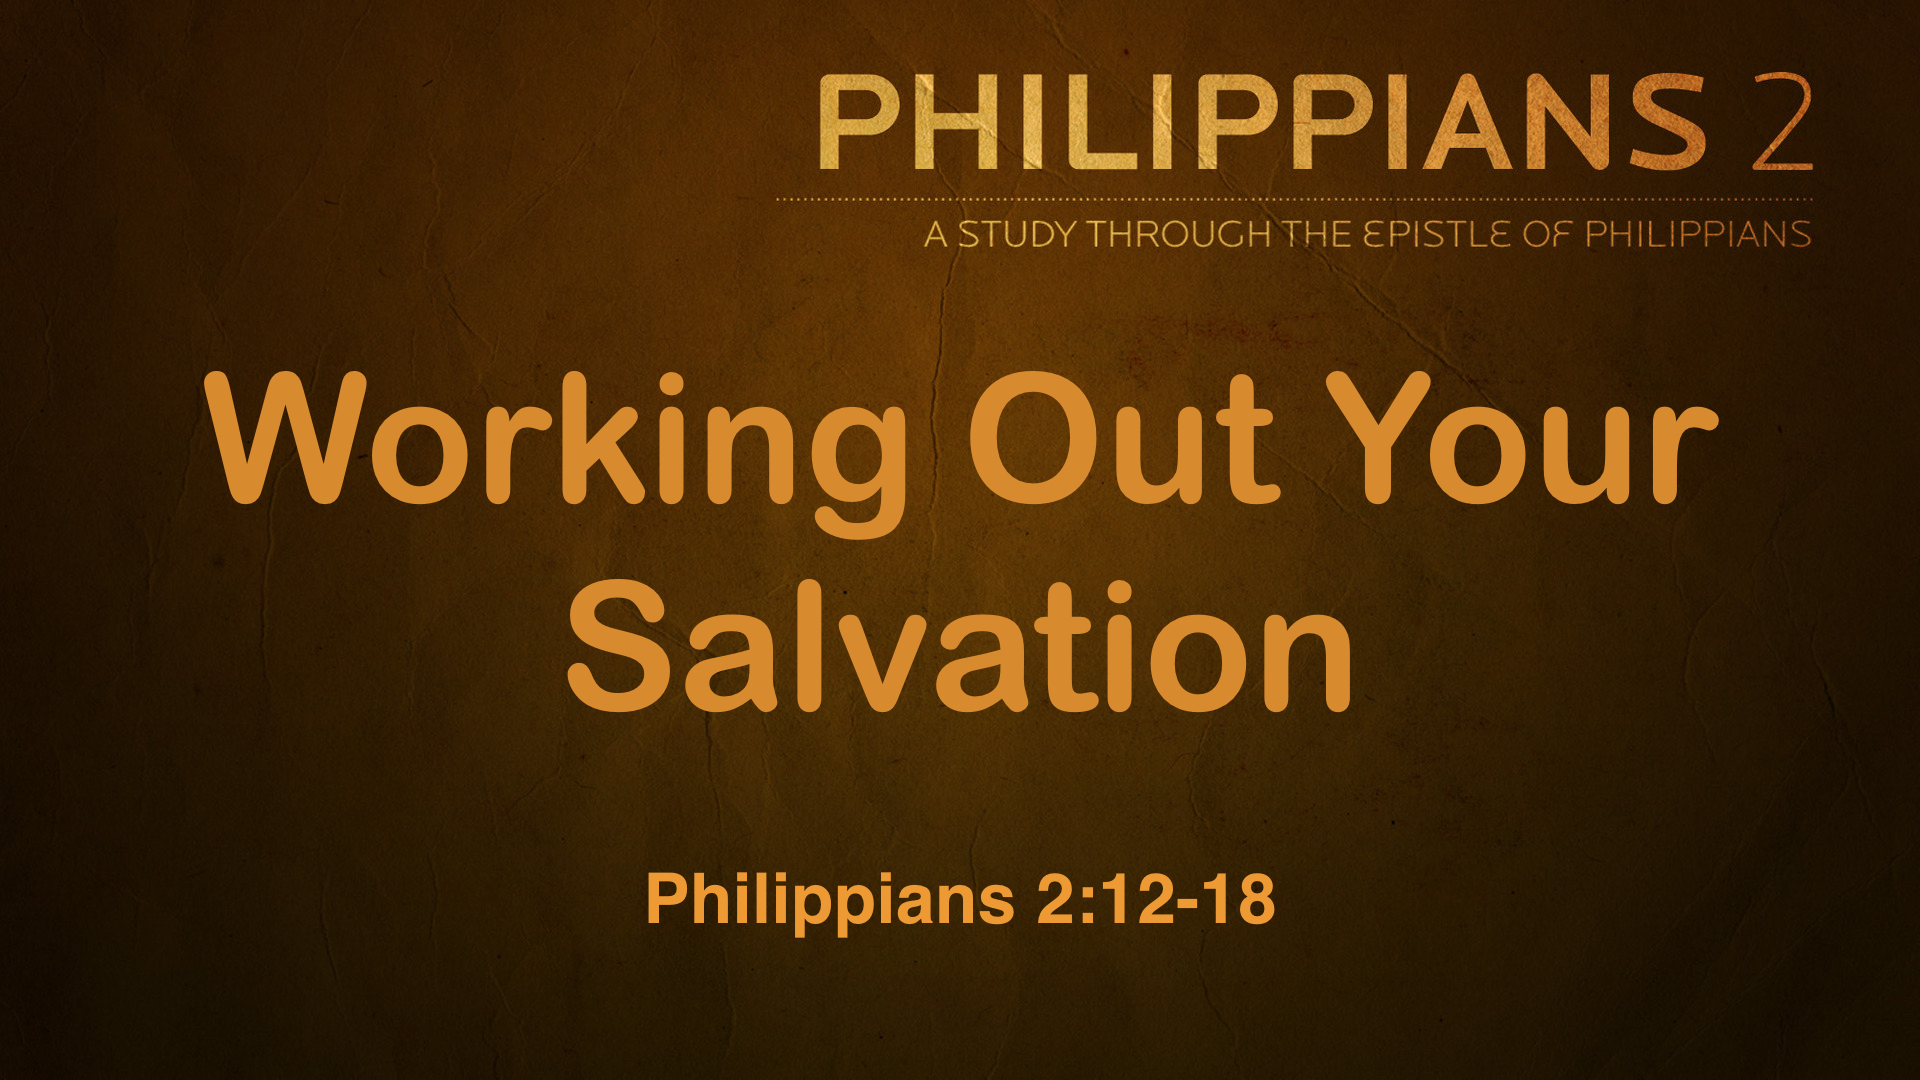 working-out-your-salvation-jpg-001